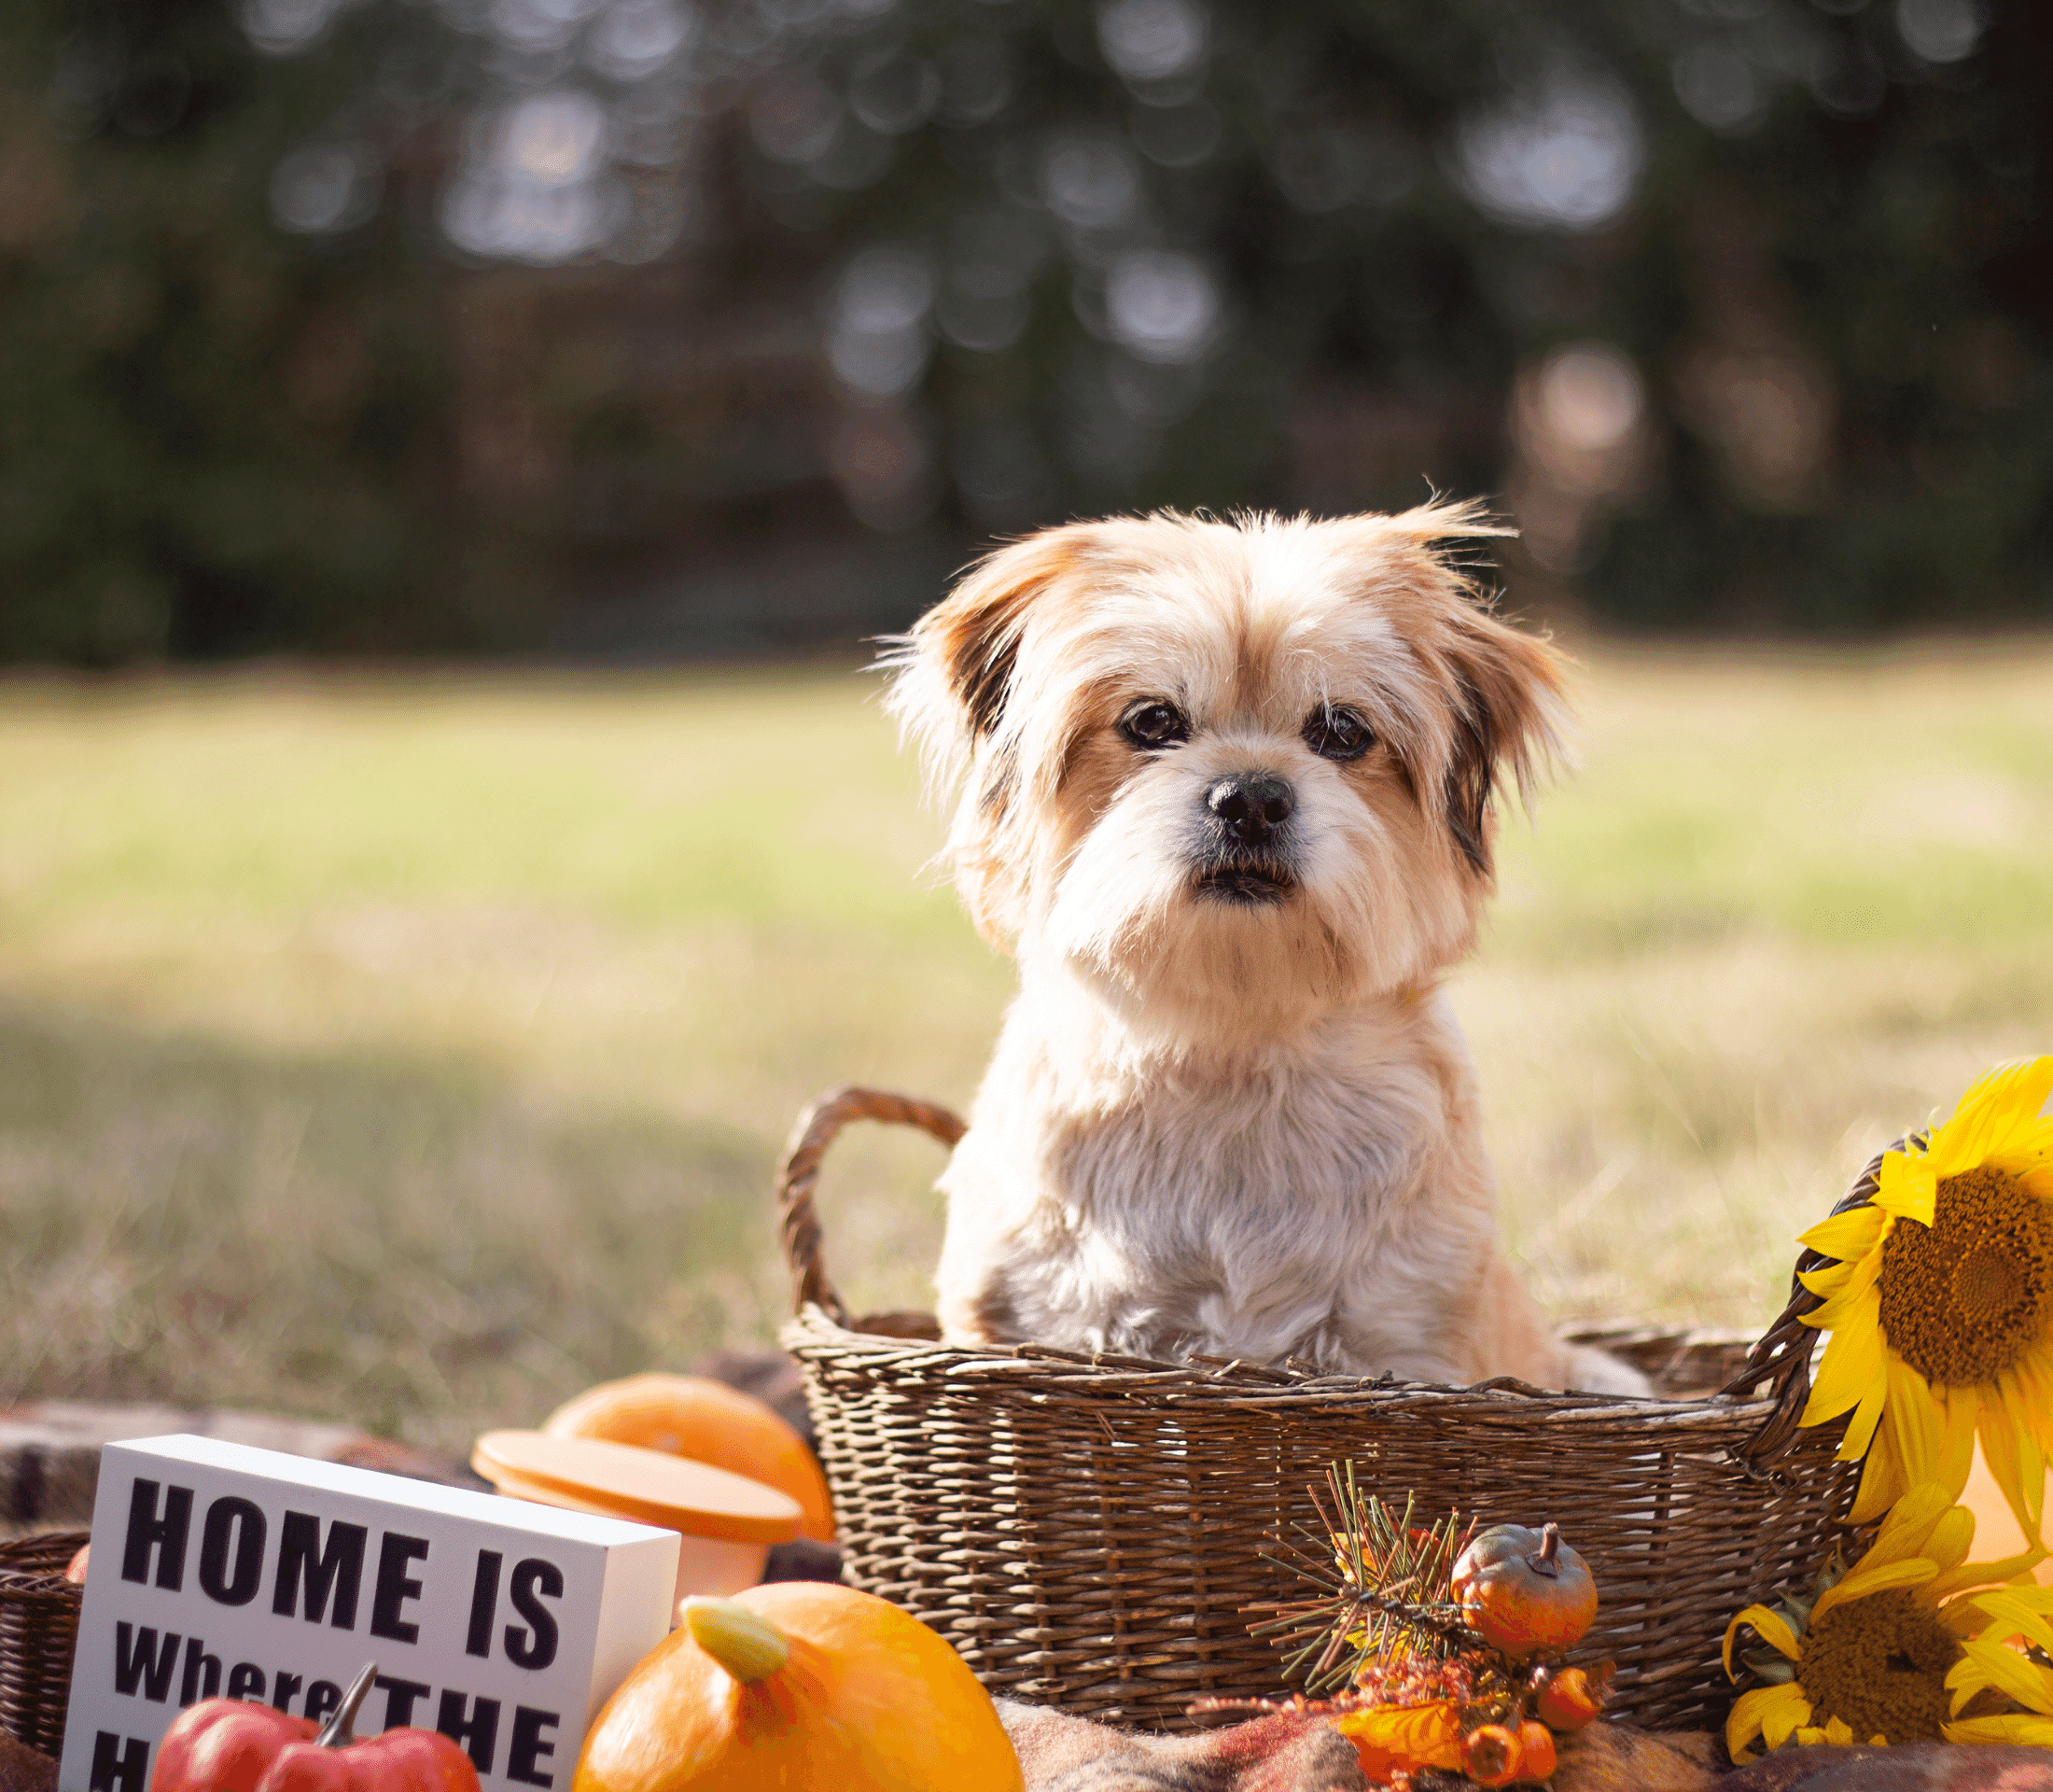 Terrier on a basket with flowers and pumpkins around